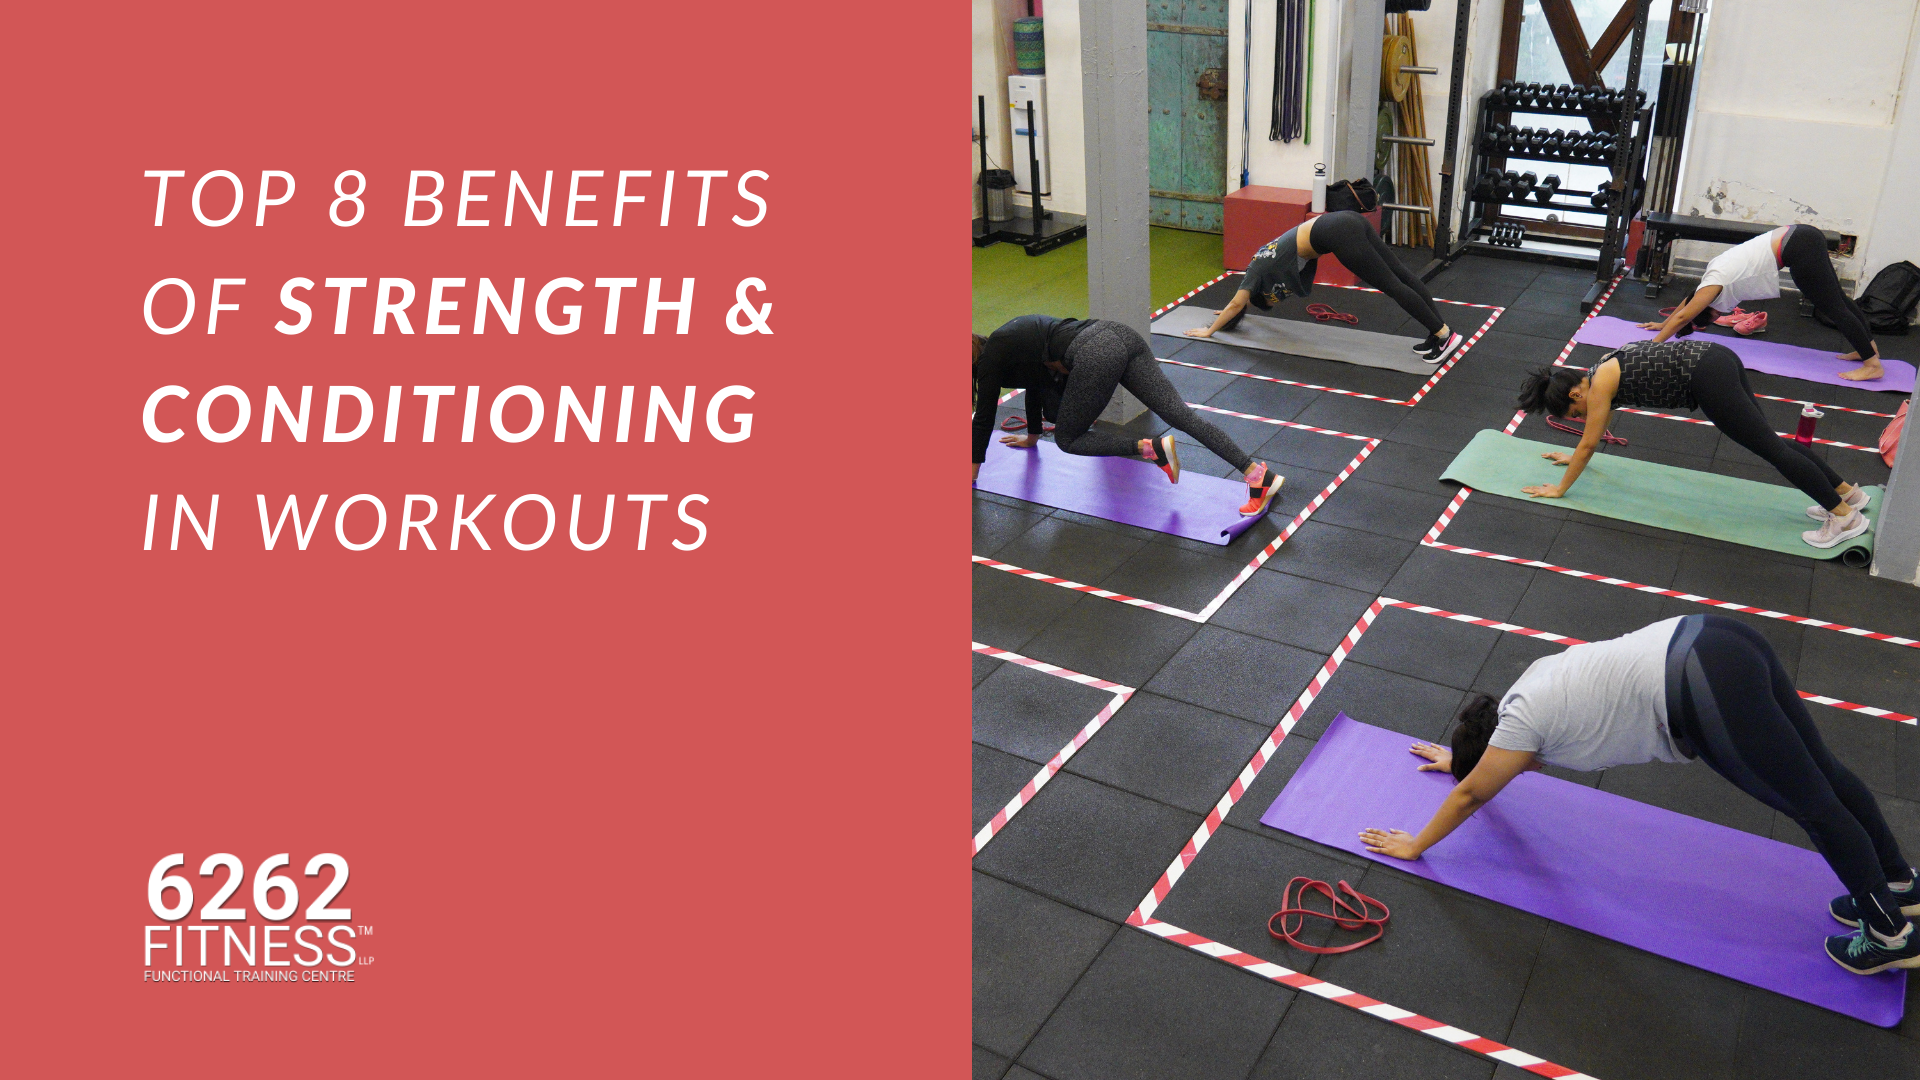 Top 8 Benefits of Strength and Conditioning in Workouts